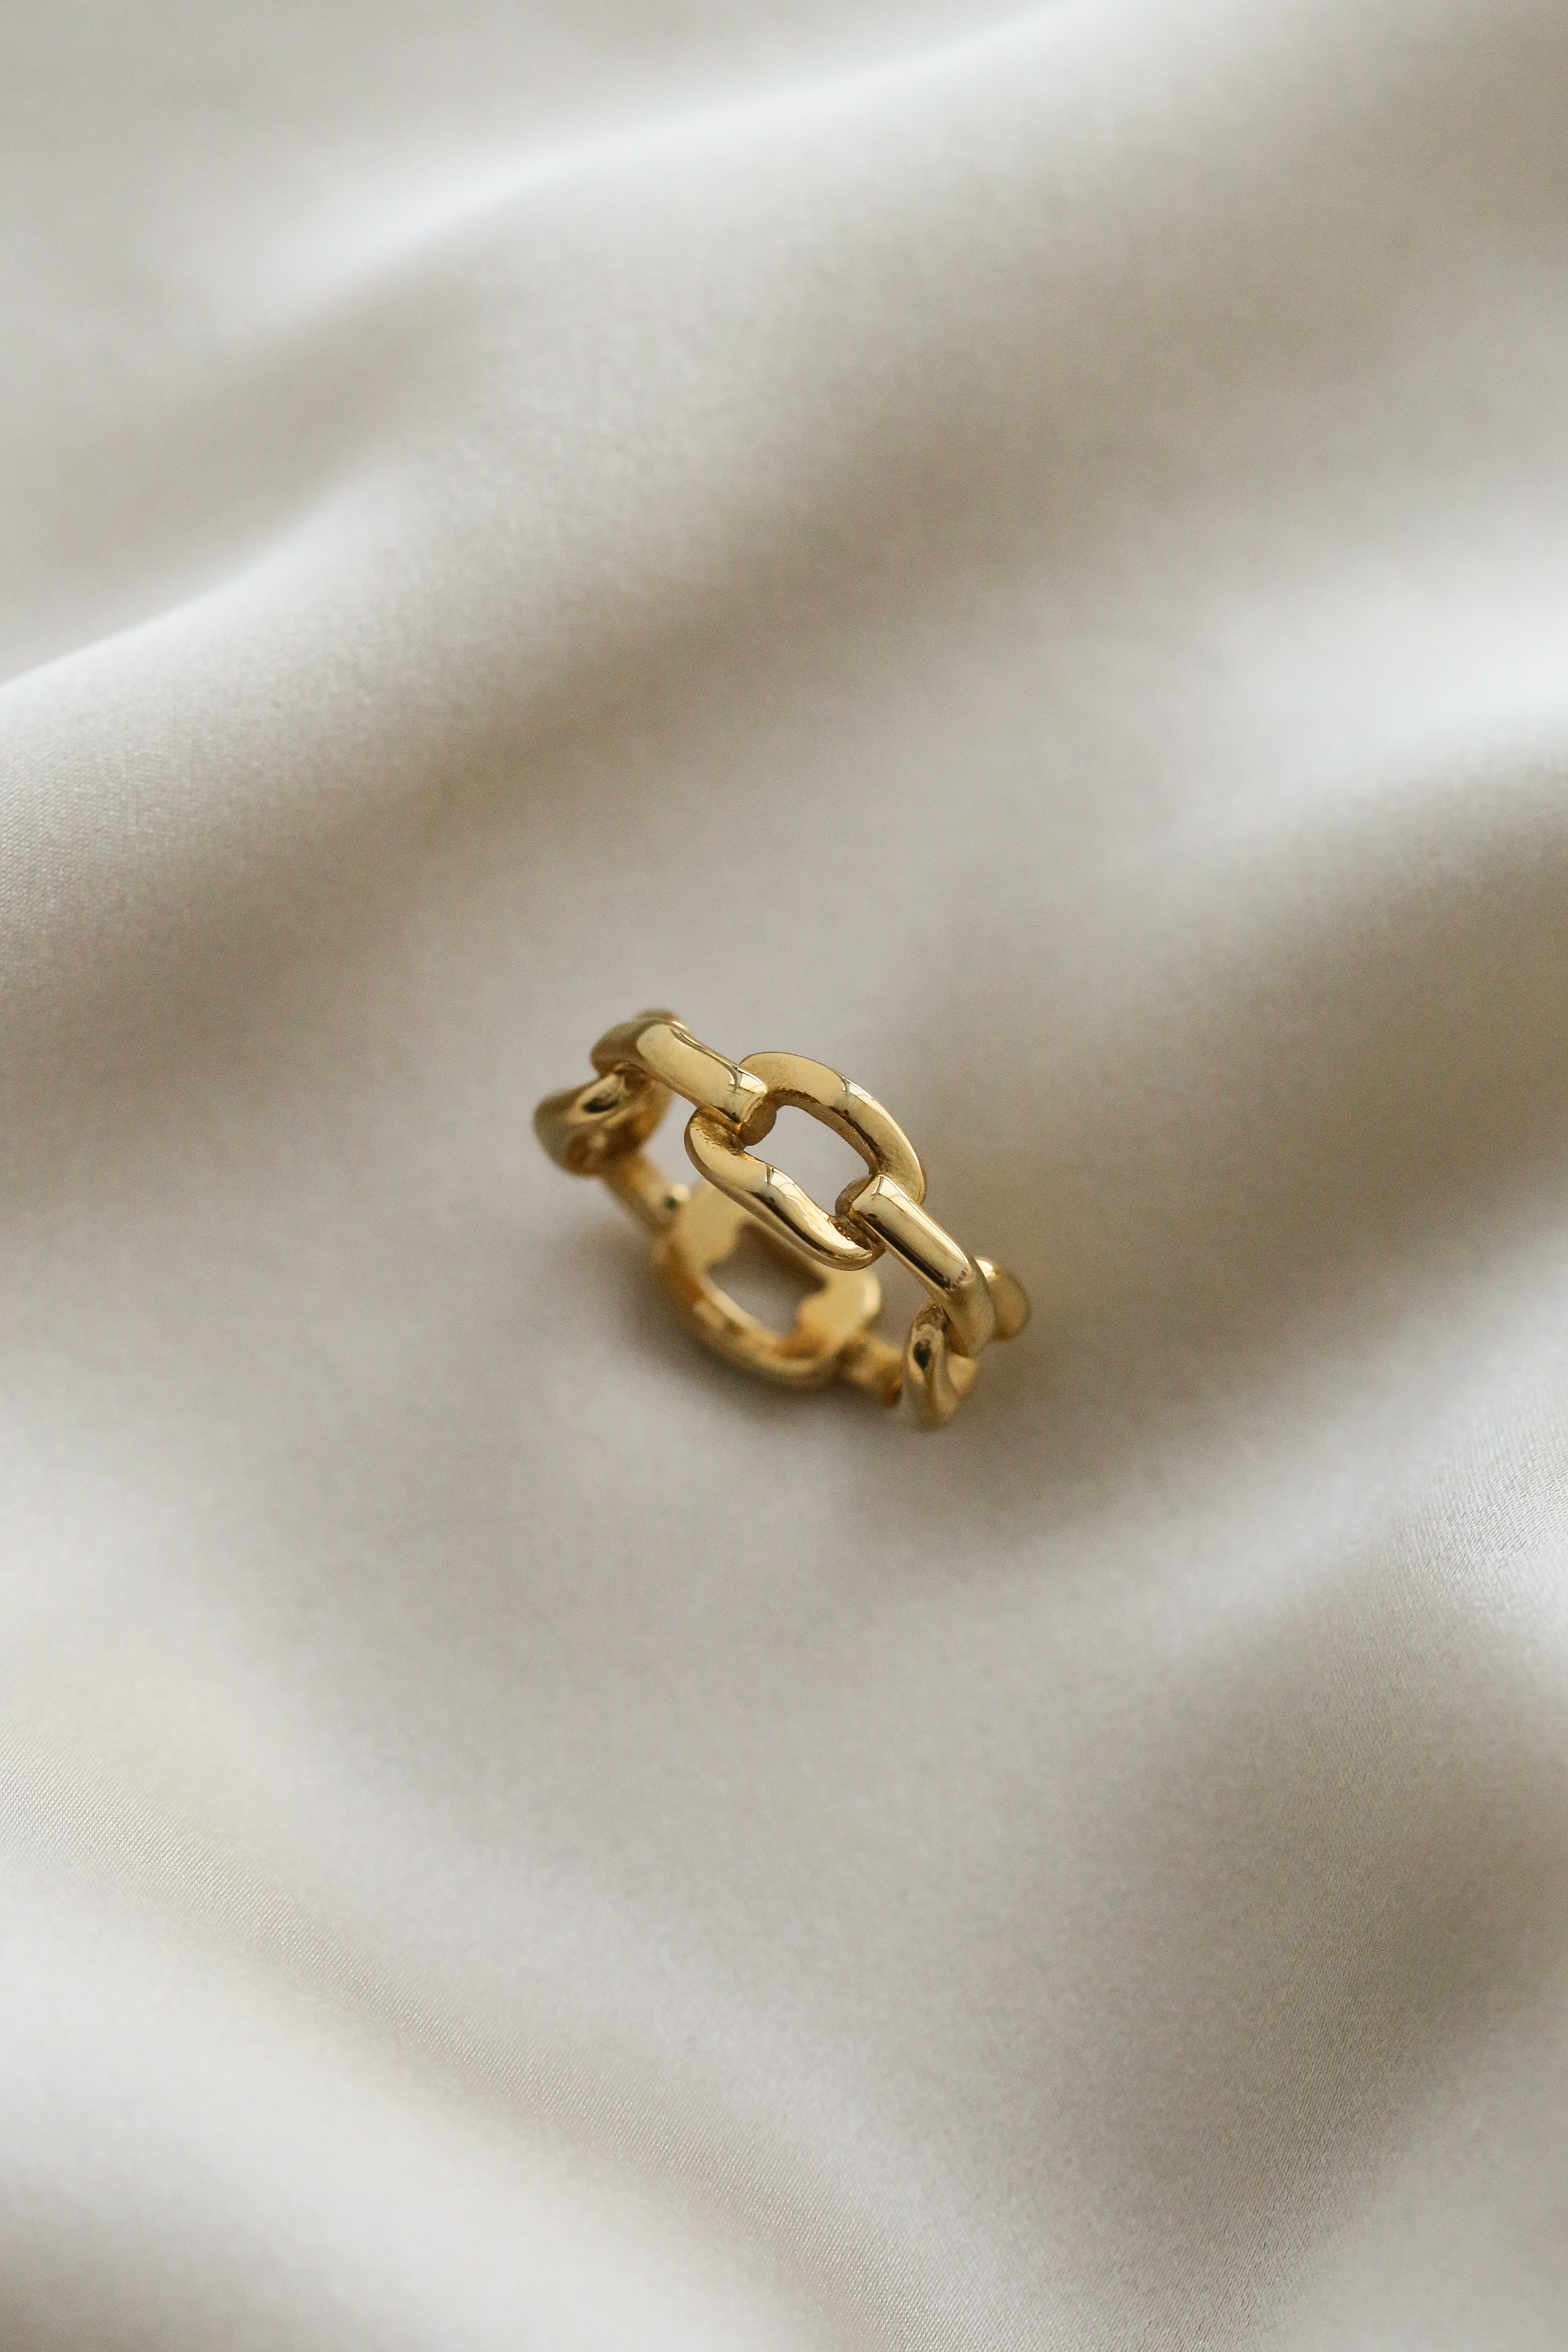 Vittoria Ring - Boutique Minimaliste has waterproof, durable, elegant and vintage inspired jewelry